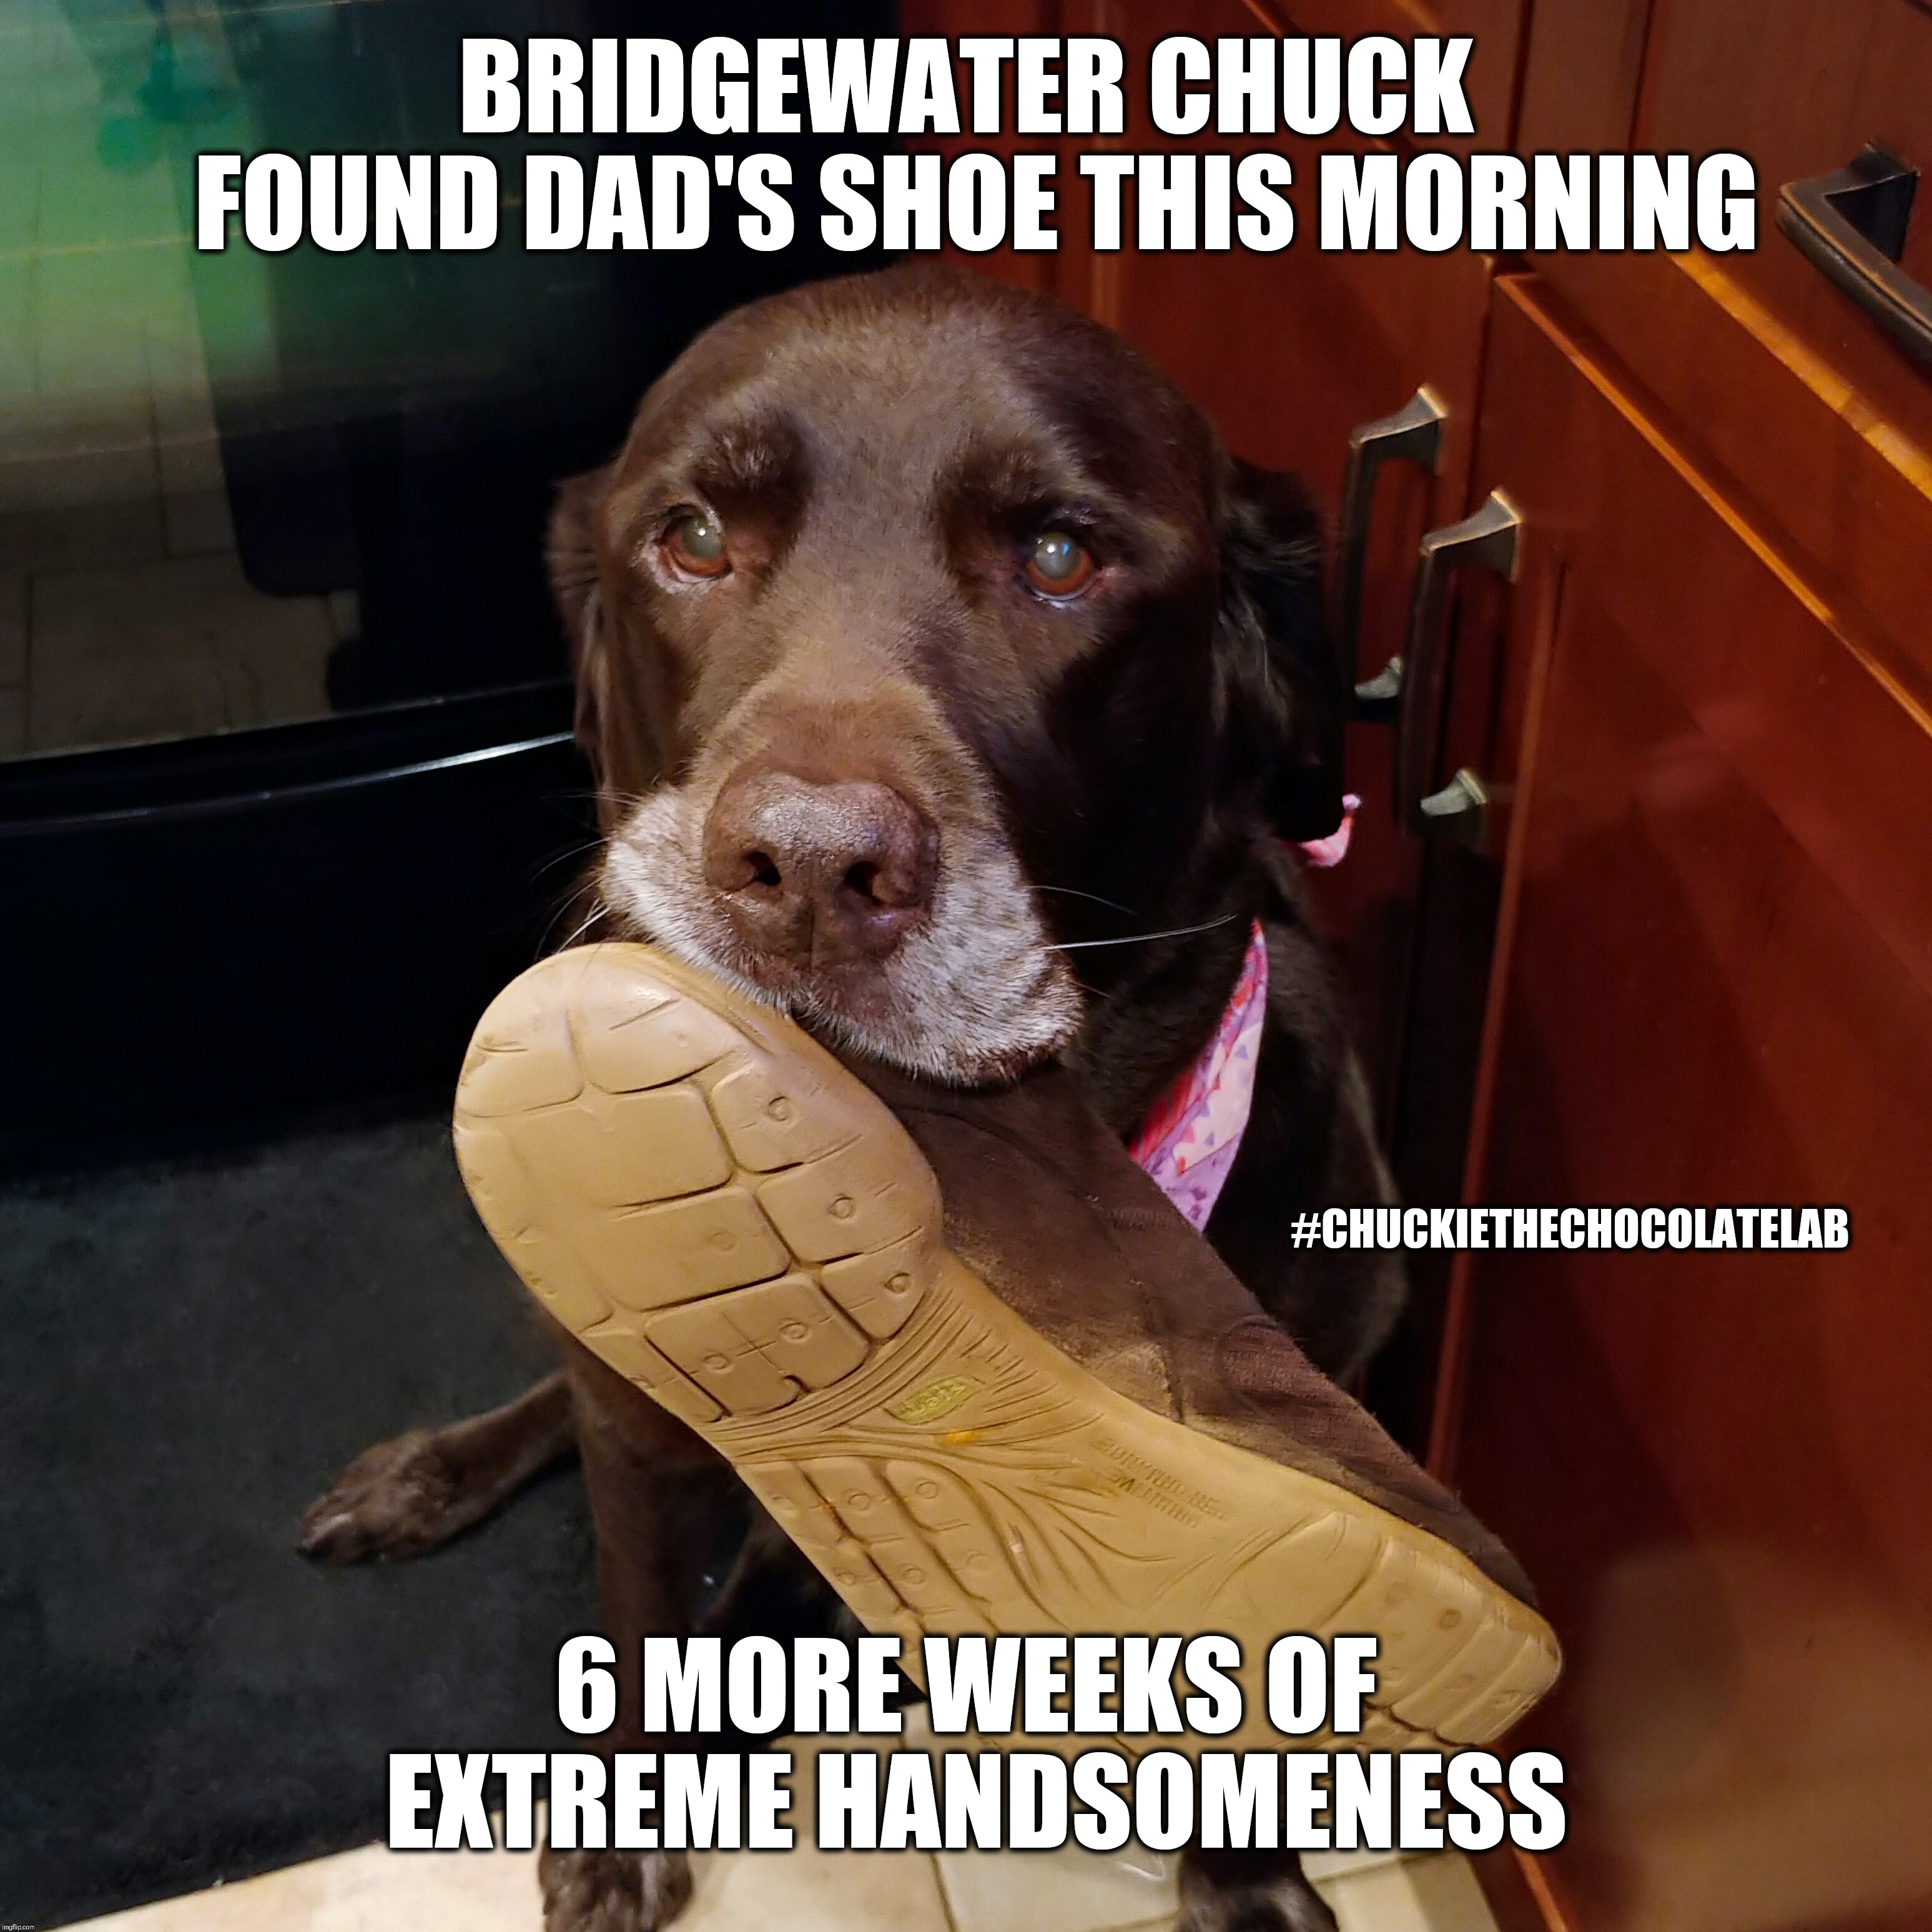 Groundhogs don't know everything  | BRIDGEWATER CHUCK FOUND DAD'S SHOE THIS MORNING; #CHUCKIETHECHOCOLATELAB; 6 MORE WEEKS OF EXTREME HANDSOMENESS | image tagged in chuckie the chocolate lab,groundhog day,dogs,funny,memes,prediction | made w/ Imgflip meme maker